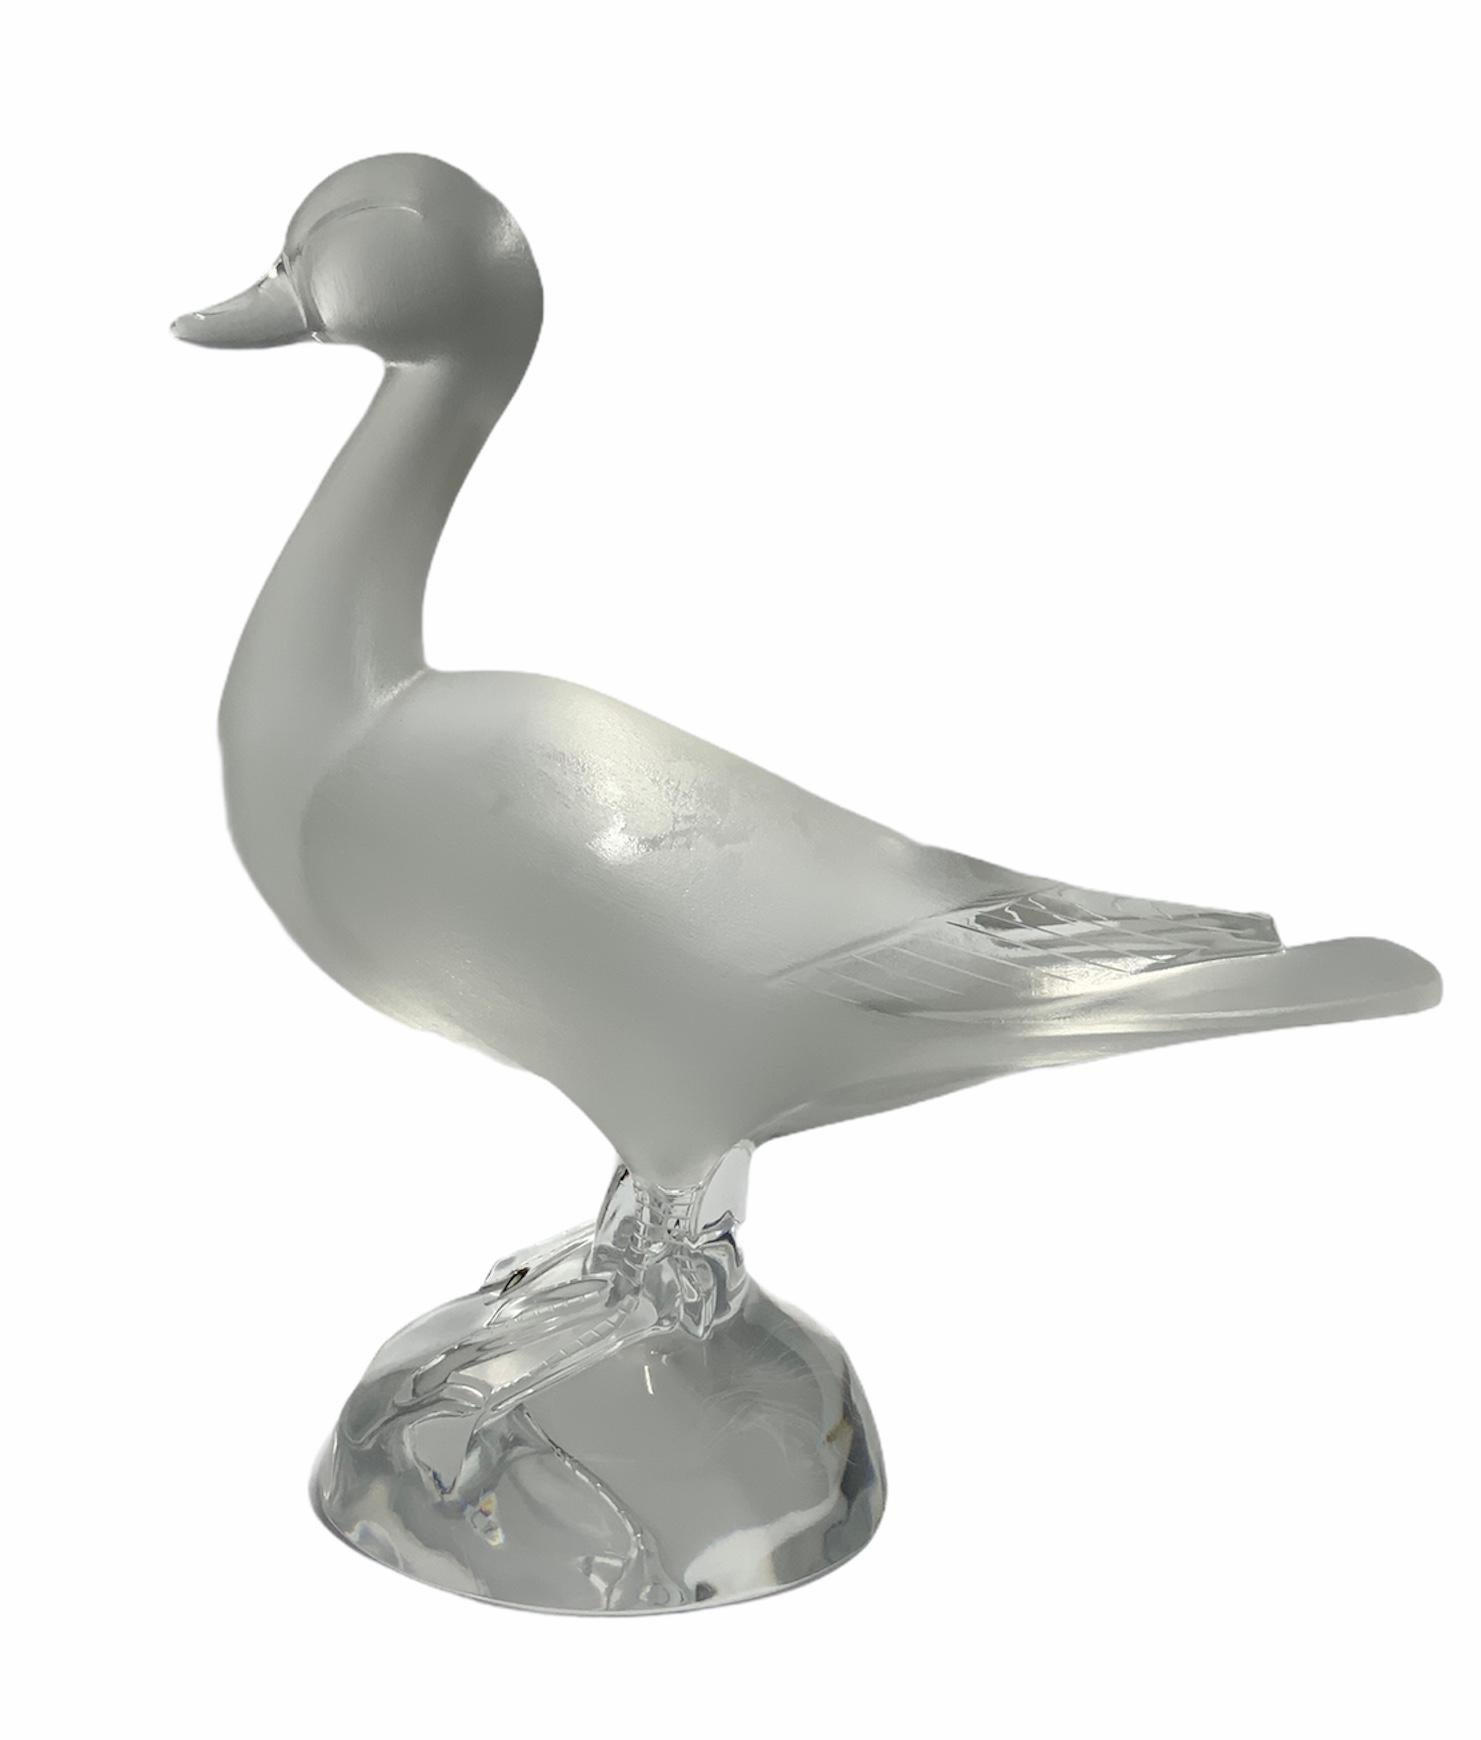 This is a Lalique Crystal frosted and clear glass sculpture of a charming duck. The sculpture is standing up over a round crystal base. It is signed Lalique, encircled R, France in the border of the base.